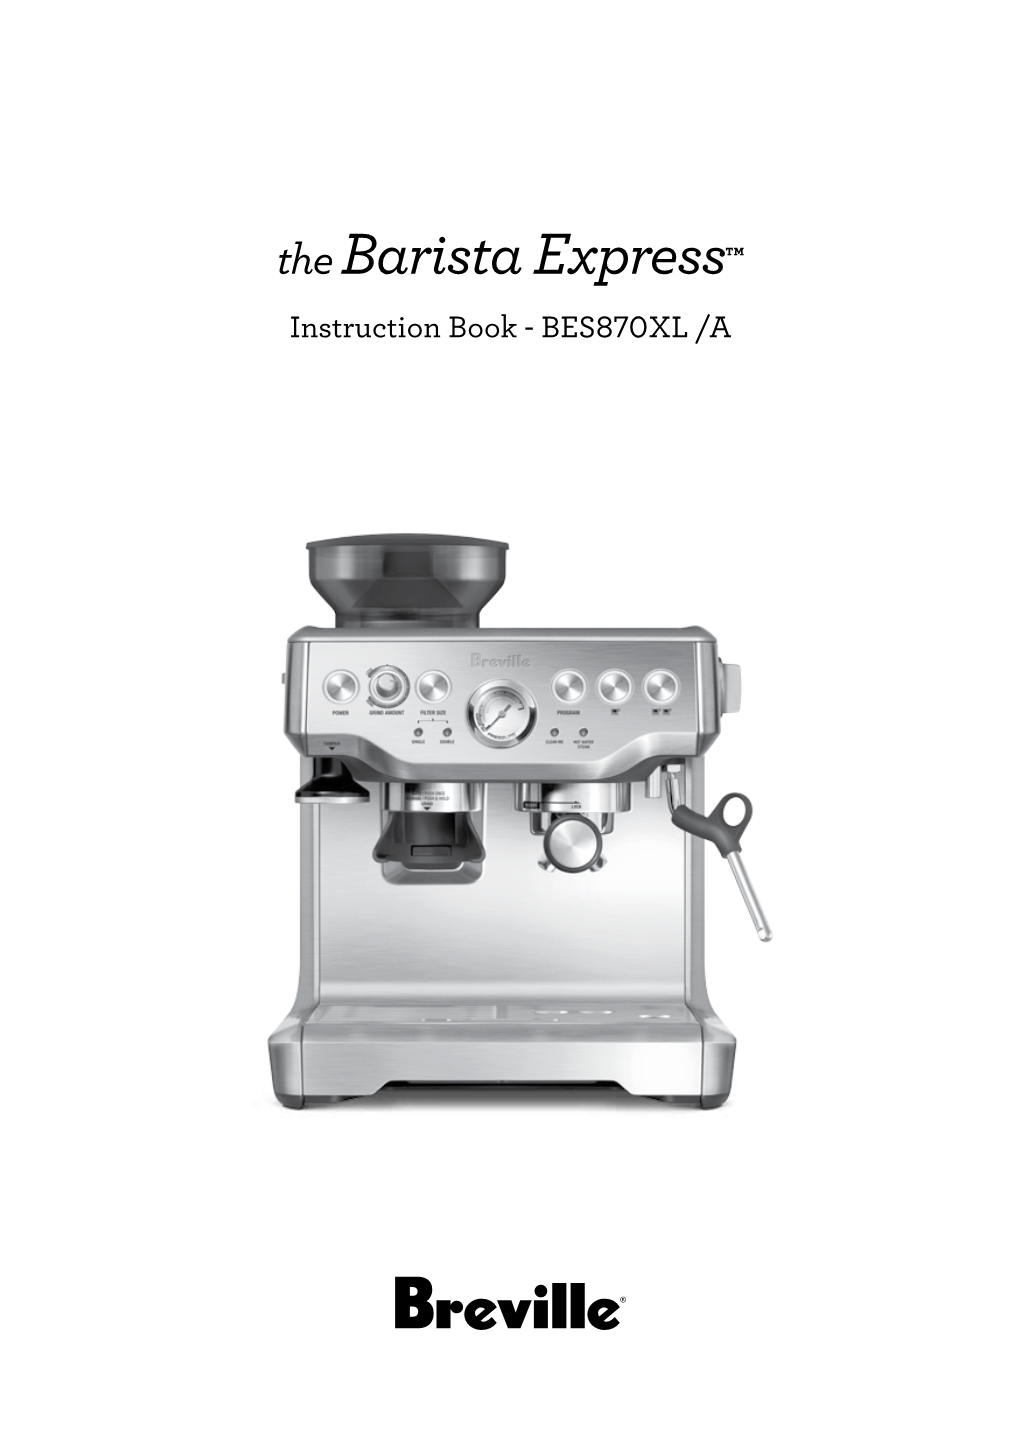 The Barista Express™ Instruction Book - BES870XL /A IMPORTANT Contents SAFEGUARDS